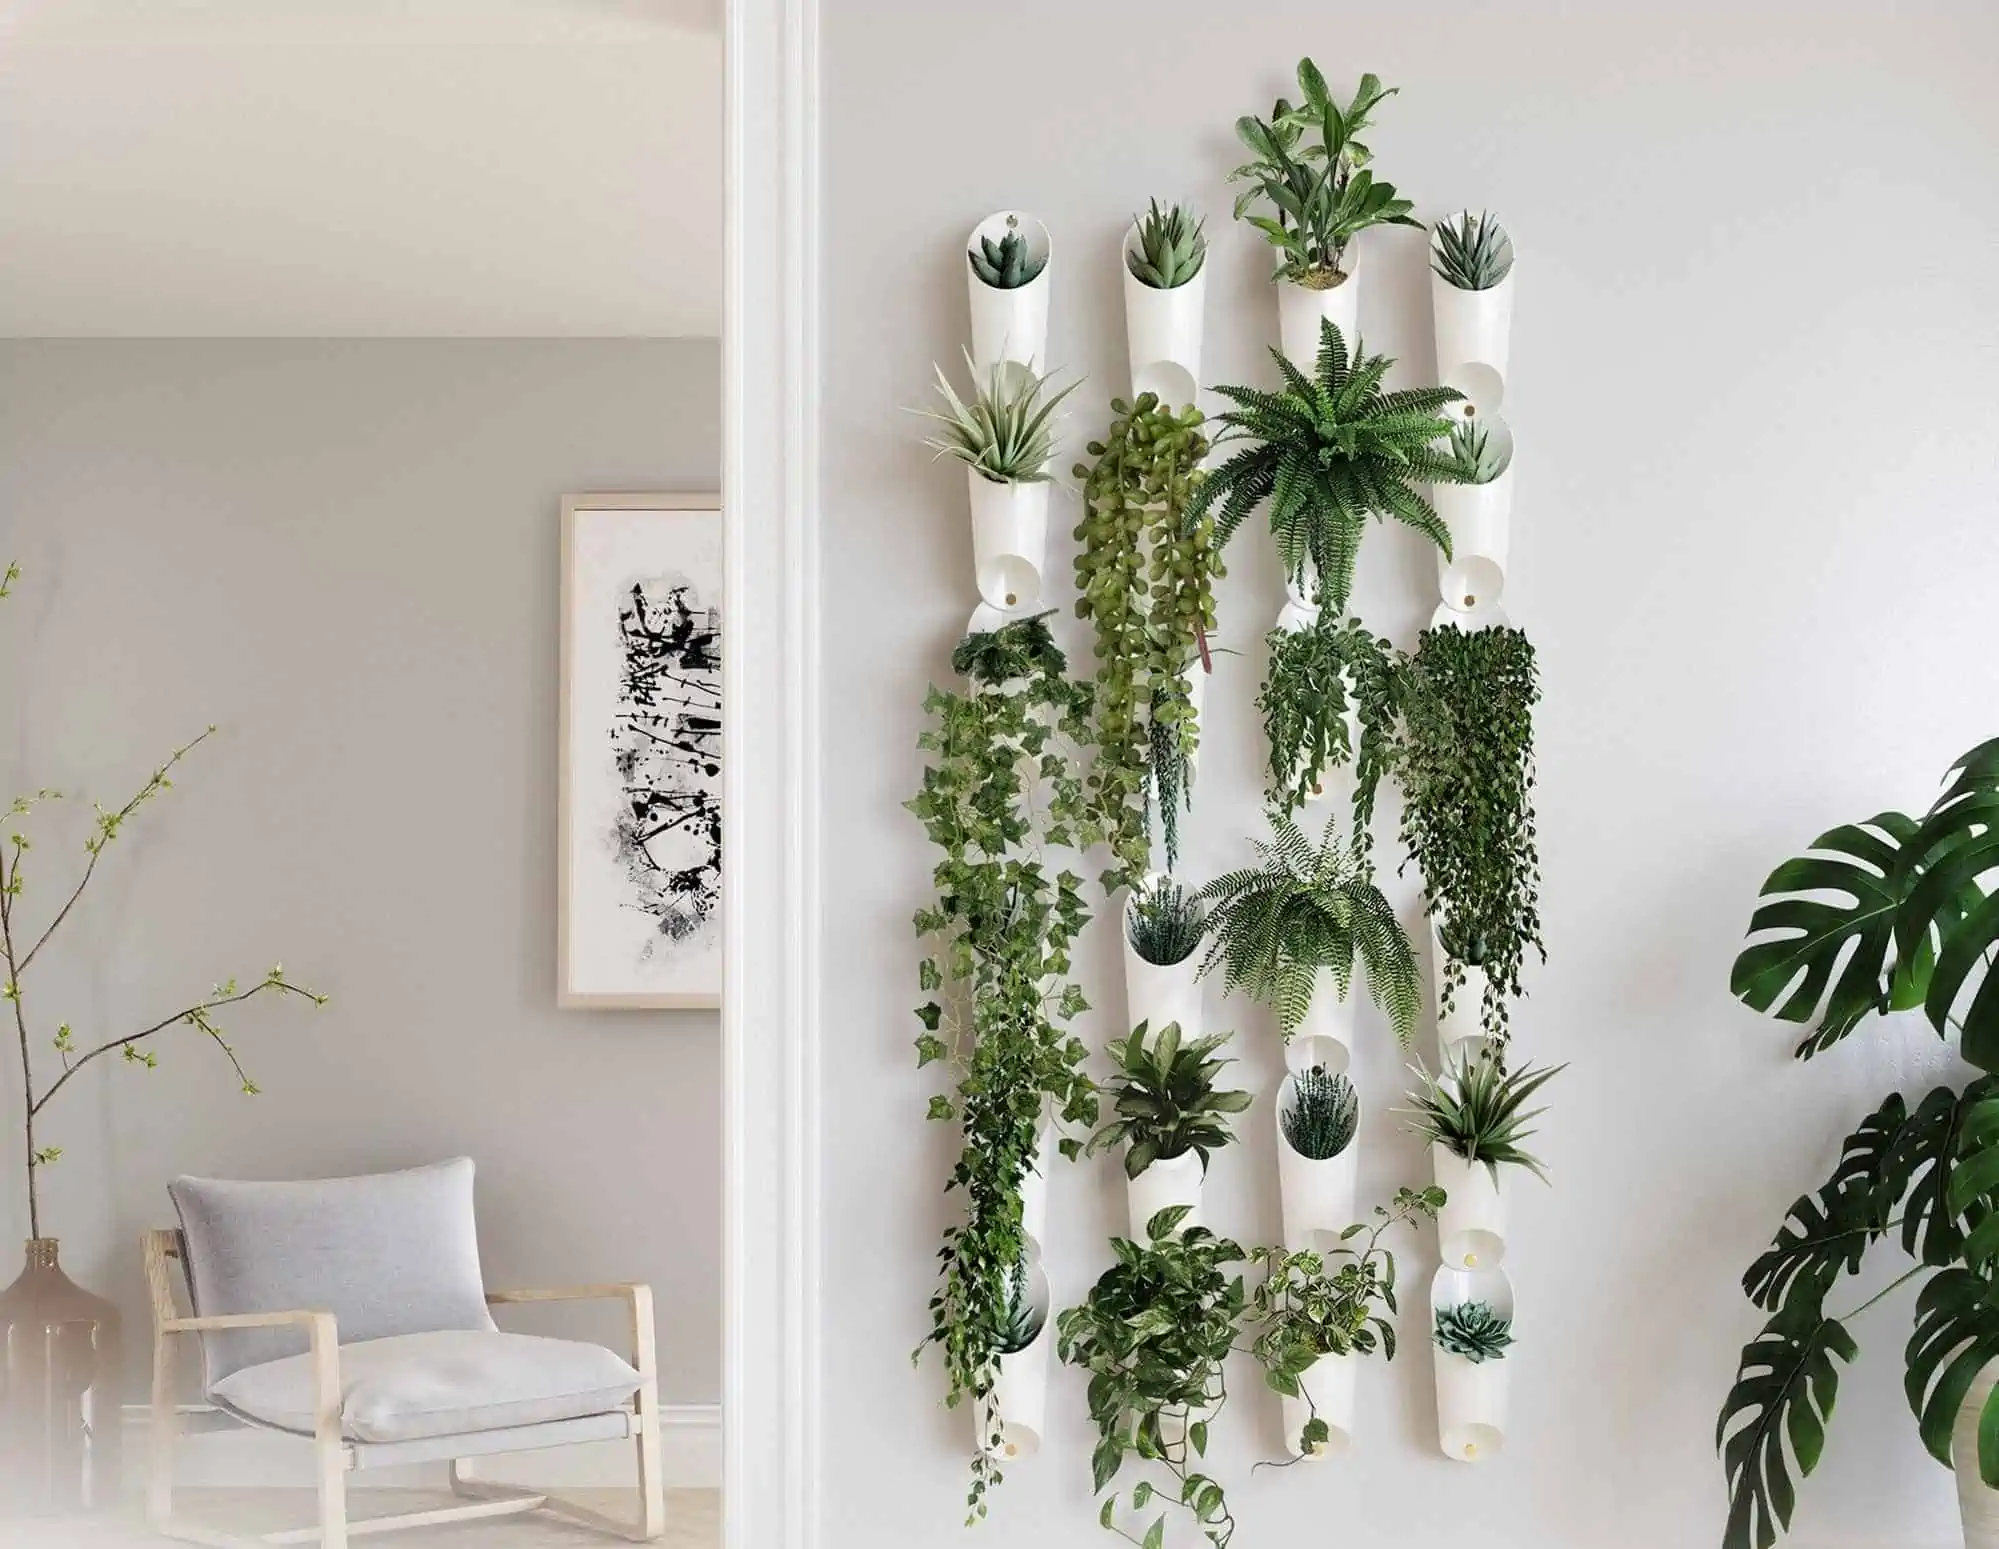 ideas for wall decoration with plant display with green indoor plants and a white chair in a living room paper craft room or bedroom paper craft